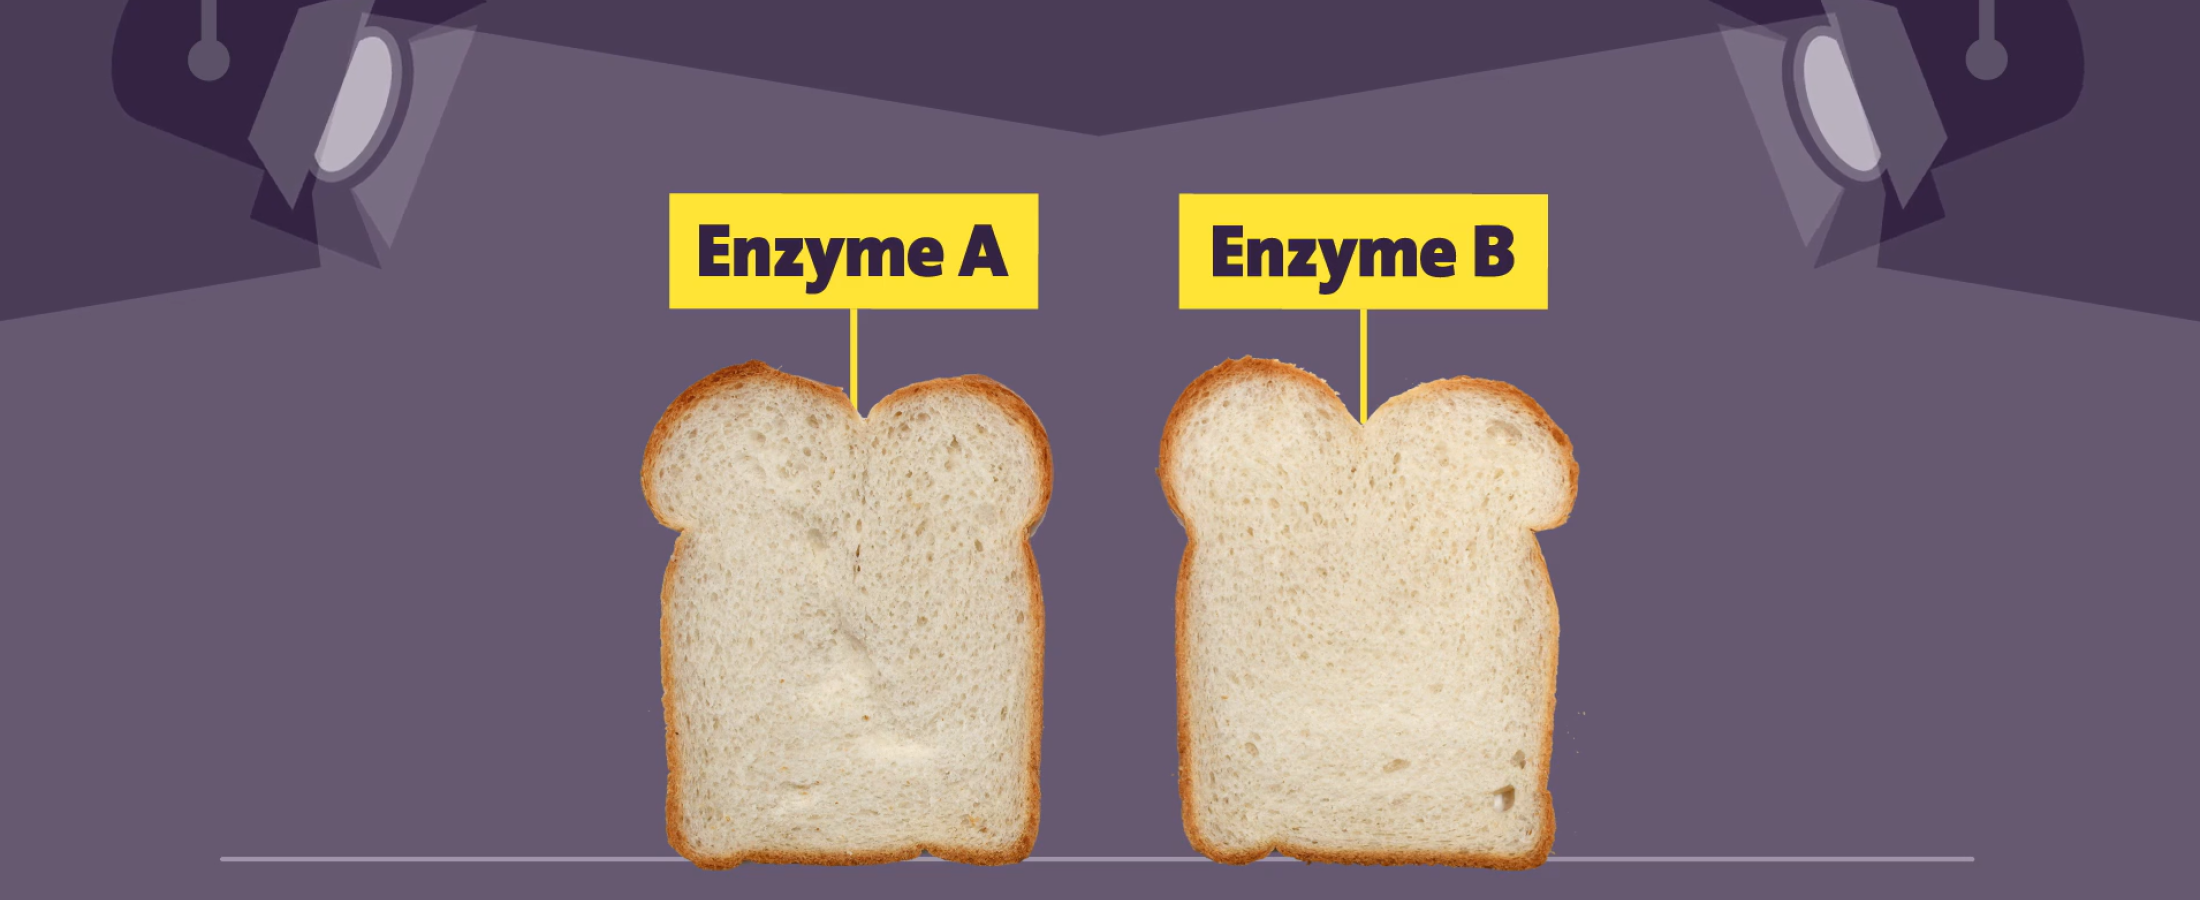 enzyme mapping video illustration